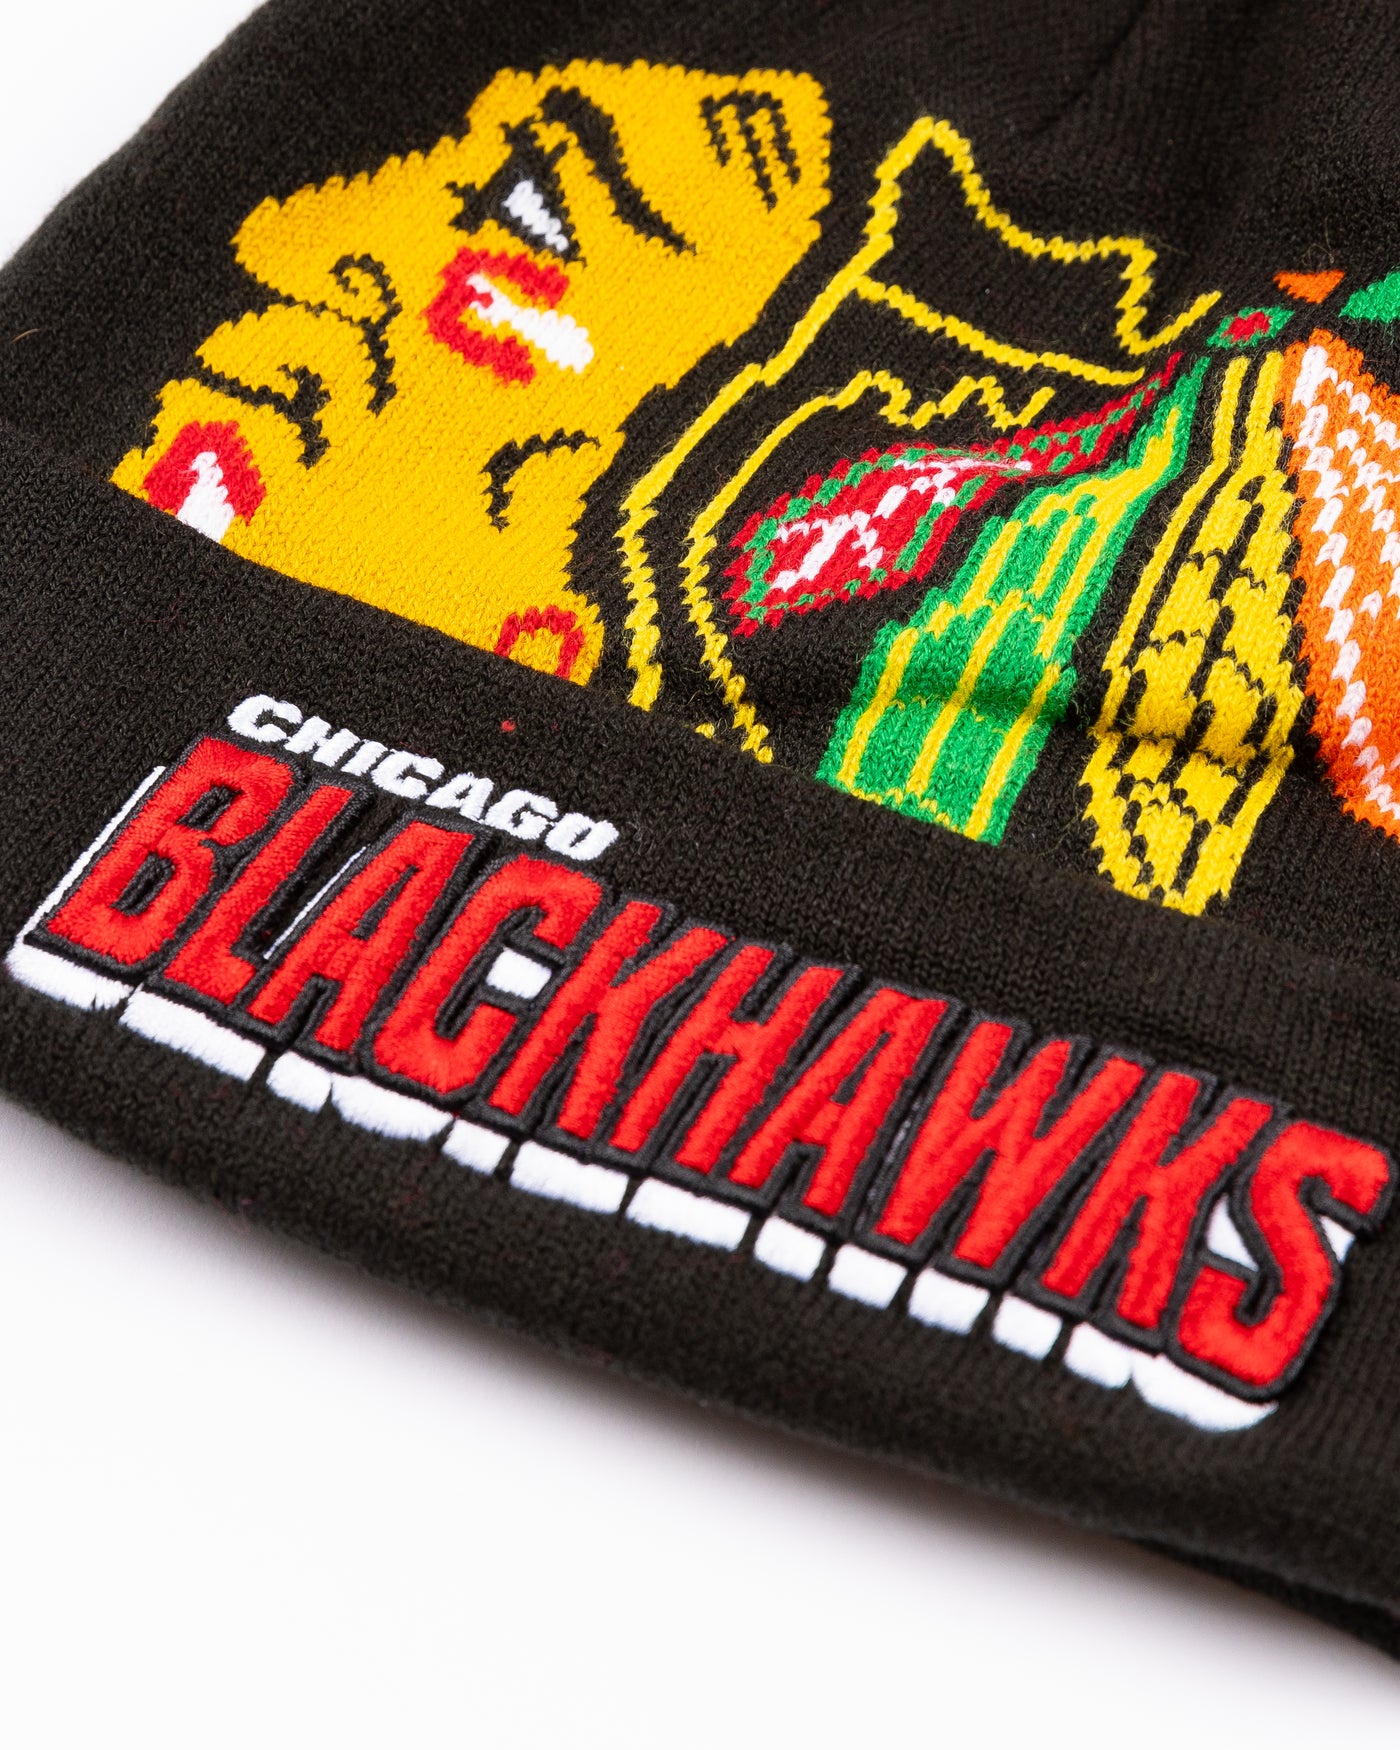 black youth Mitchell & Ness knit hat with Chicago Blackhawks primary logo on front and embroidered wordmark on cuff and red pom - detail lay flat